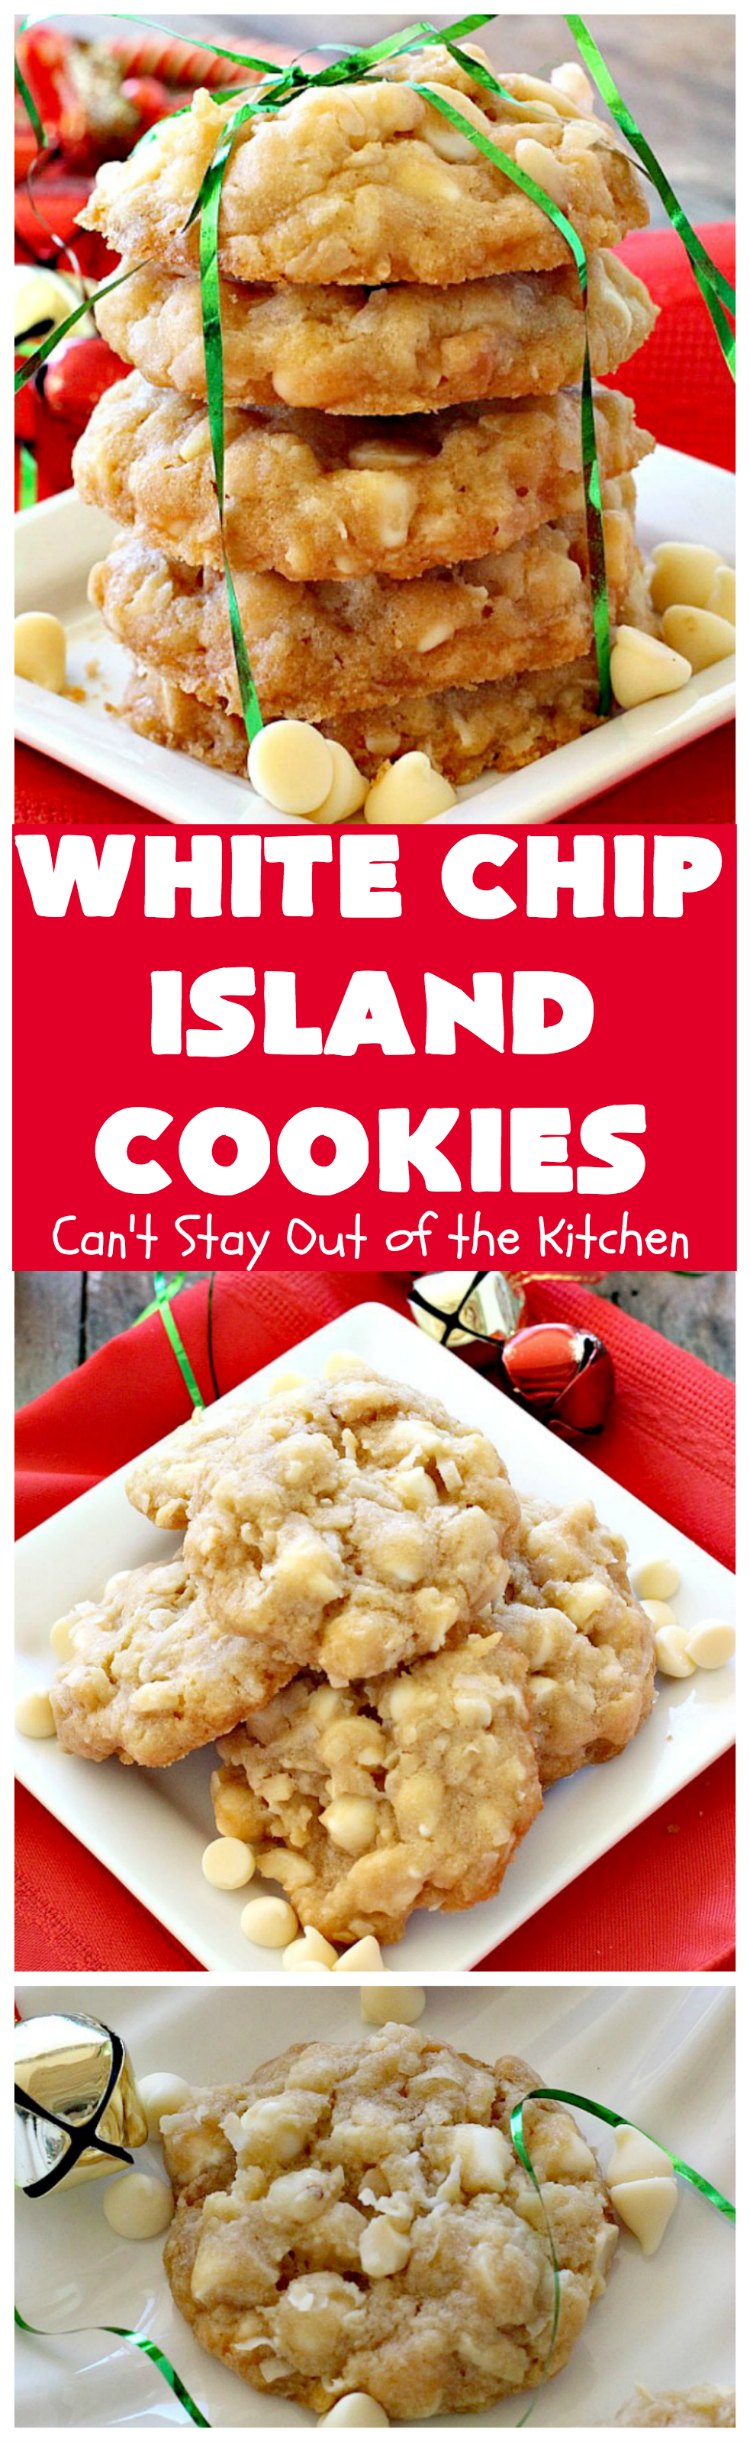 White Chip Island Cookies | Can't Stay Out of the Kitchen